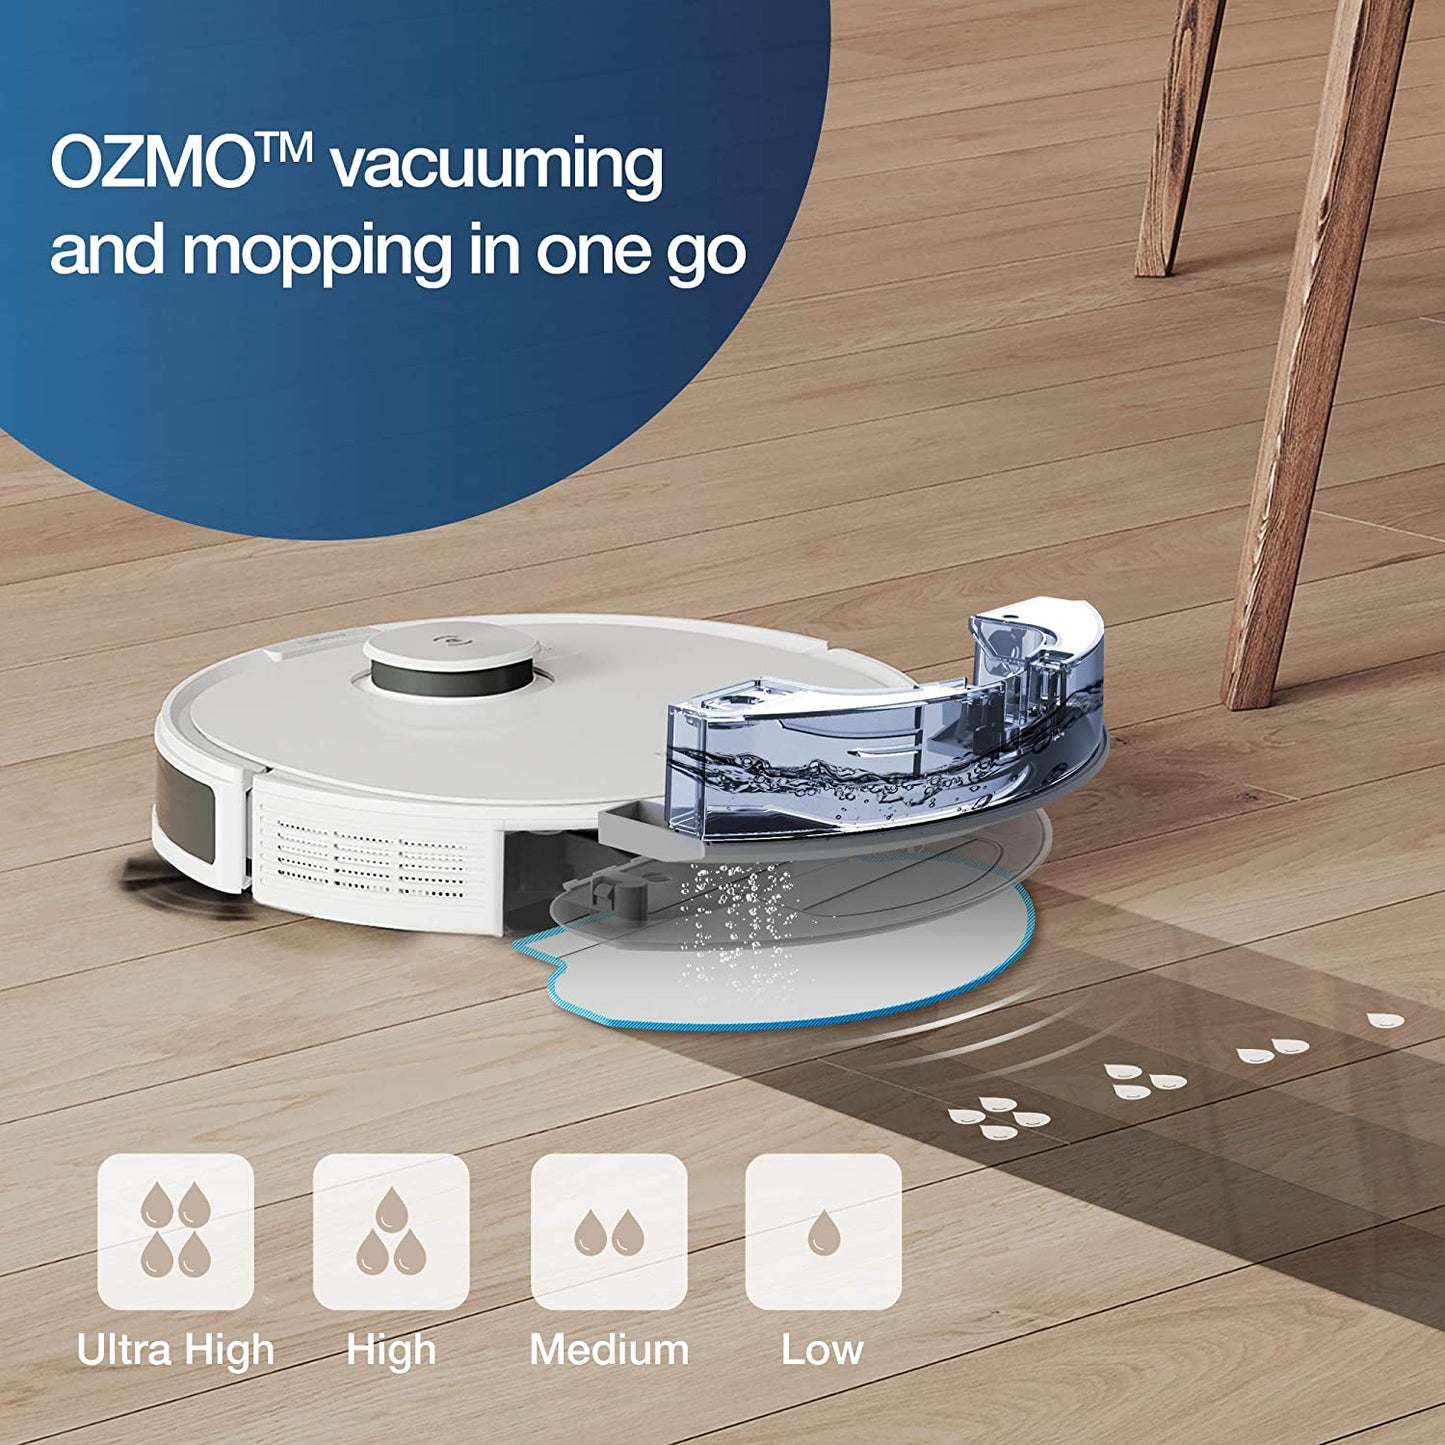 ECOVACS - Robot Vacuum Cleaner Deebot N8+ and Mop